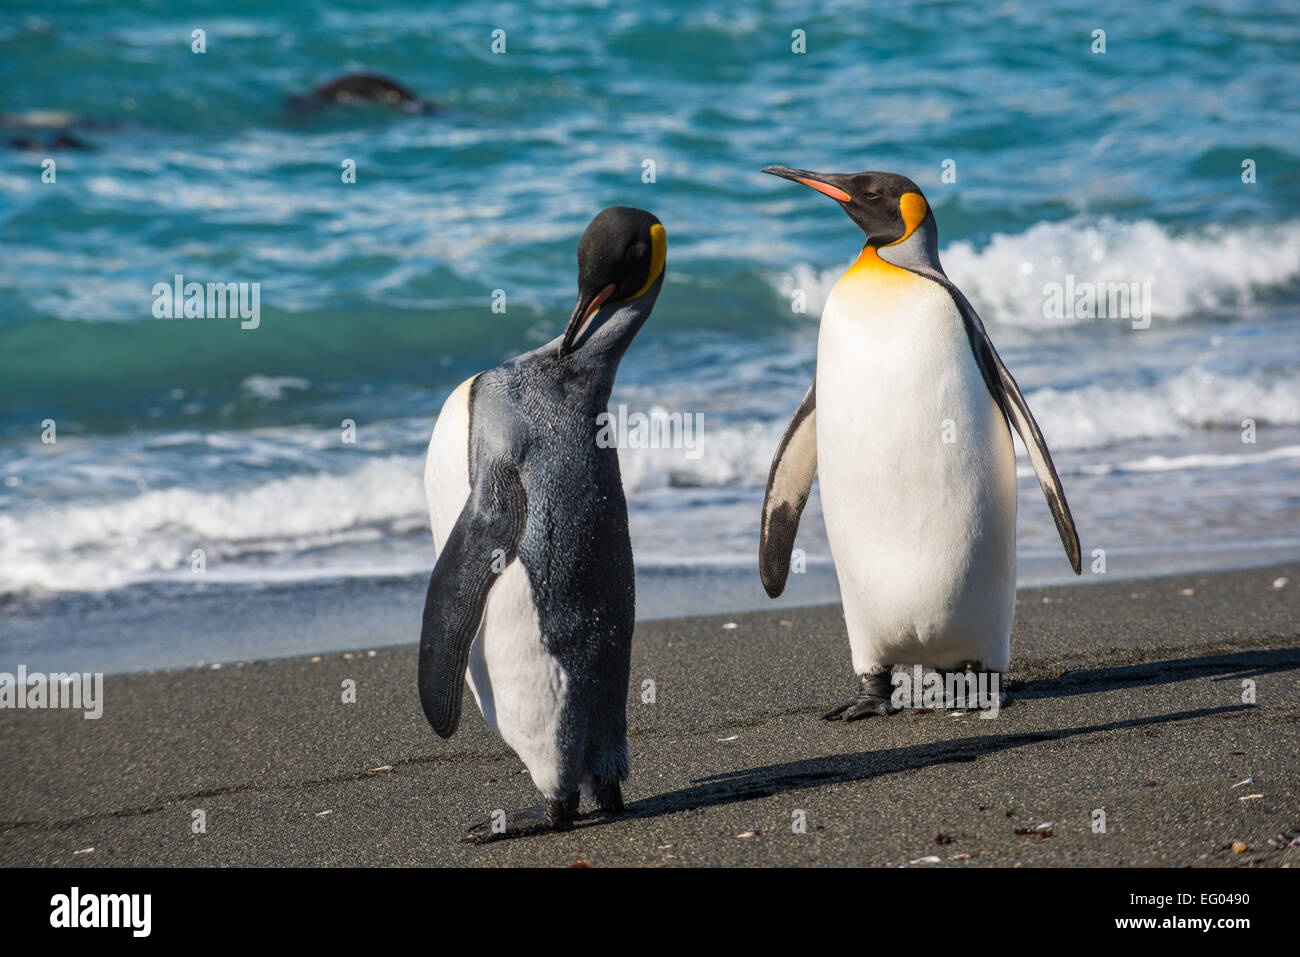 King Penguin (Aptenodytes patagonicus) removing moulting feathers at Gold Harbour, South Georgia, Antarctica Stock Photo